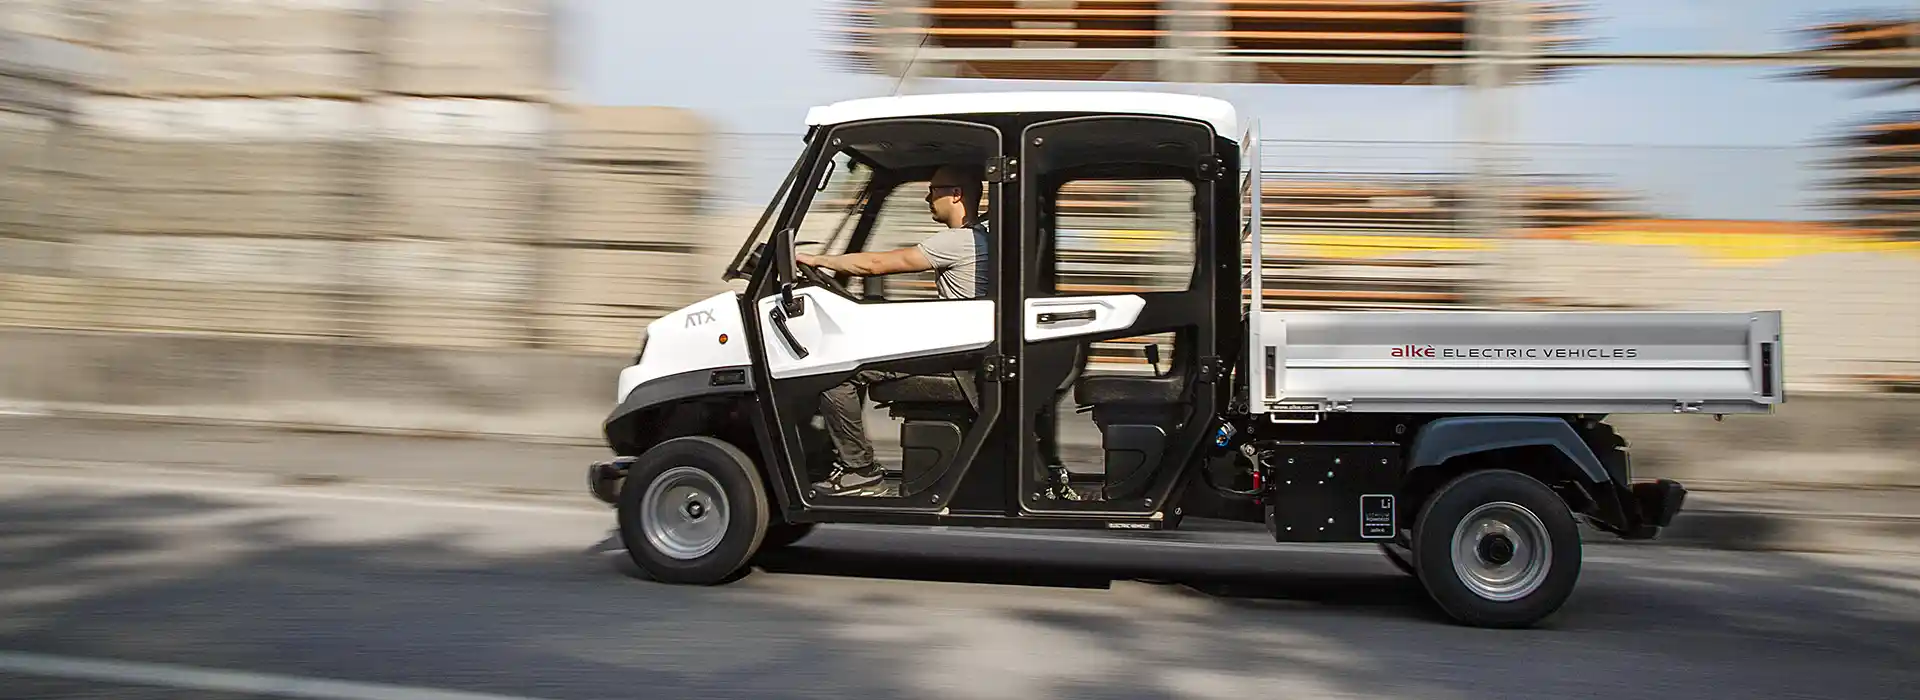 Electric Vehicles Double Cab ATX ED - 4-seater vehicle for transporting work groups and materials